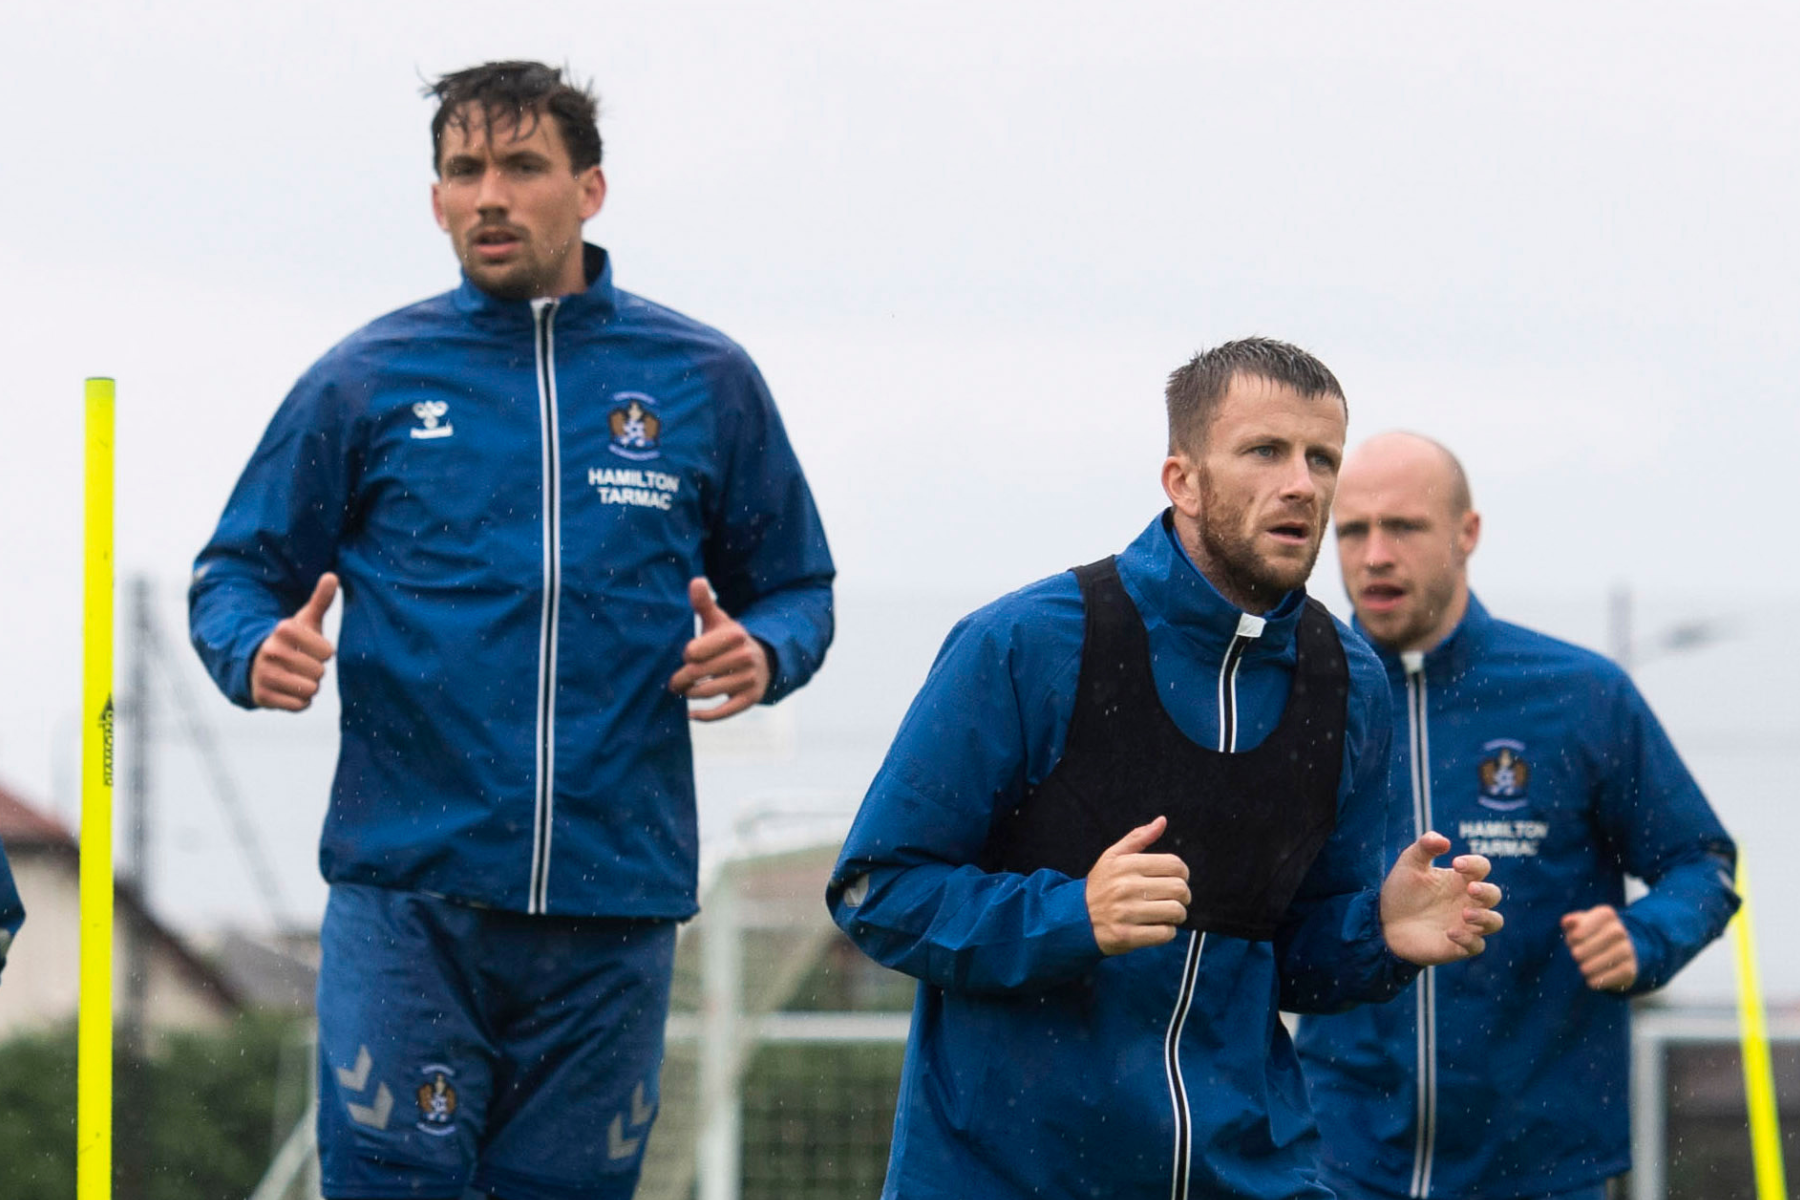 Kilmarnock to train on grass pitches at Largs ahead of Aberdeen clash